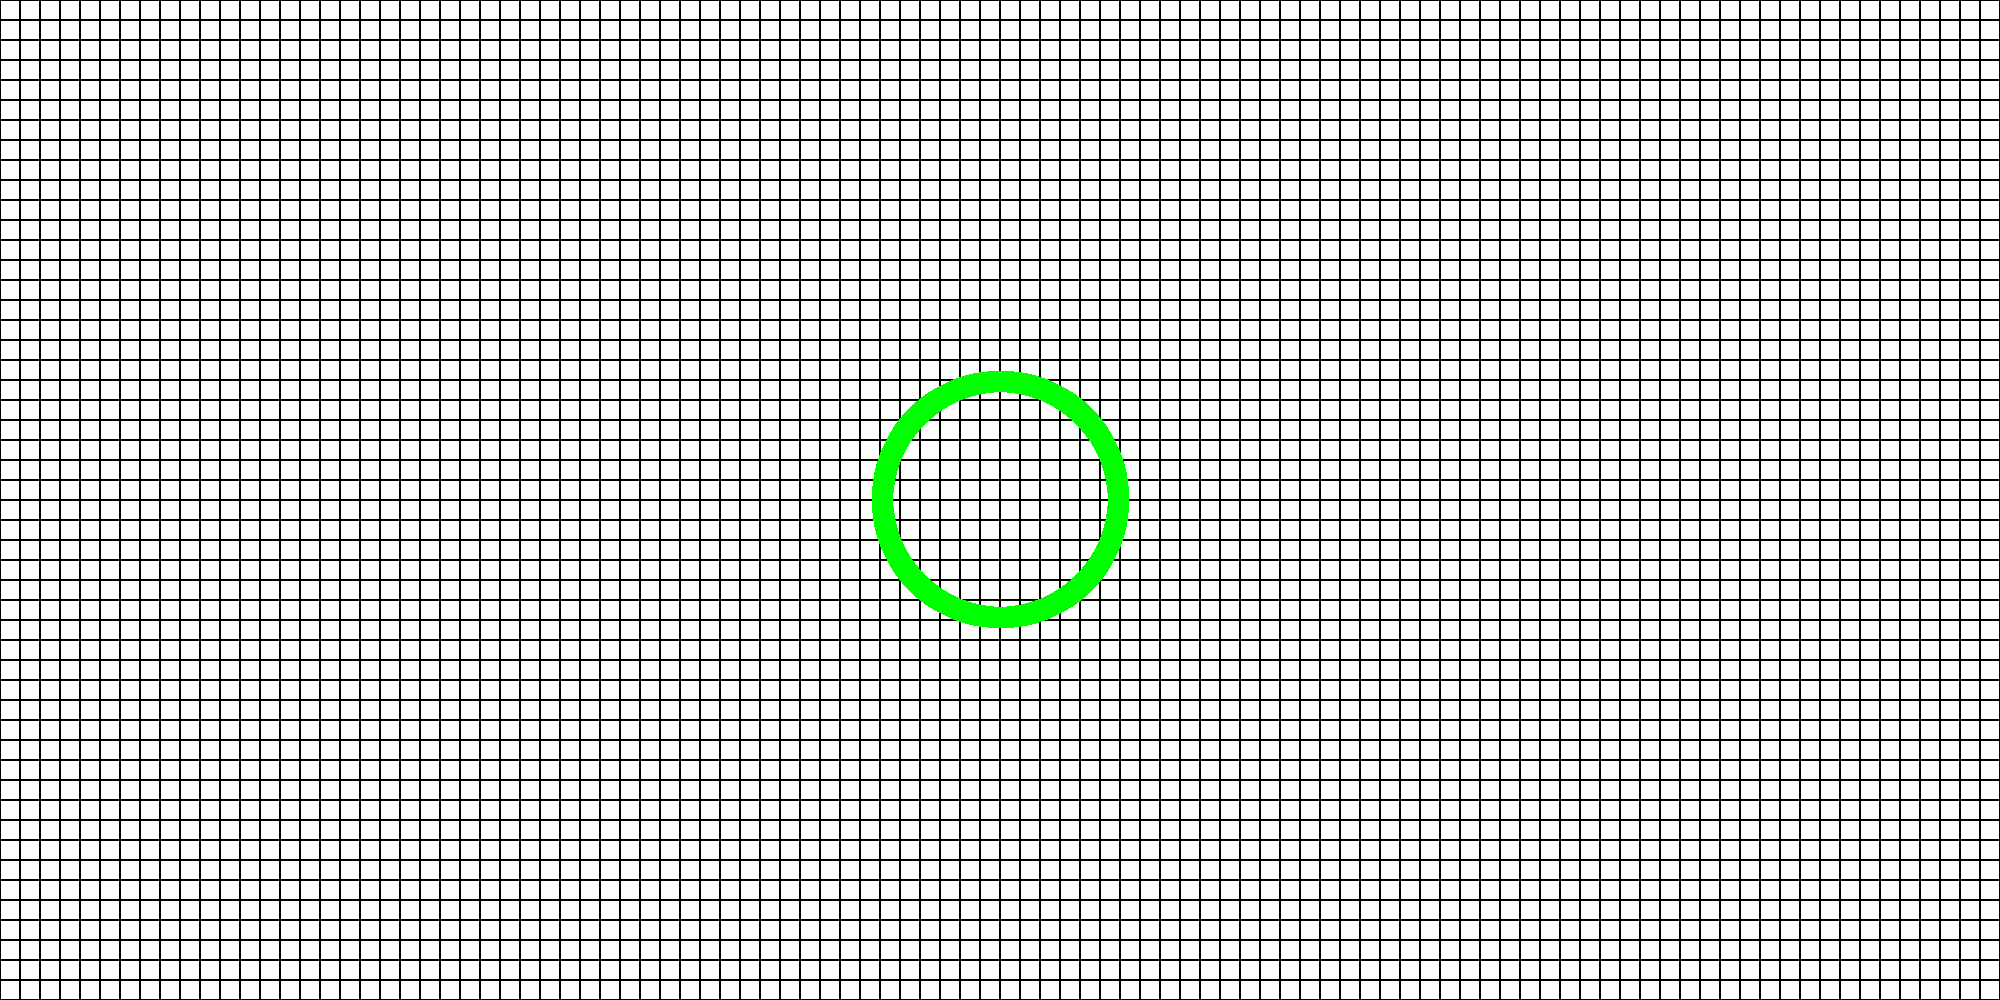 input_images/grid-circle.png